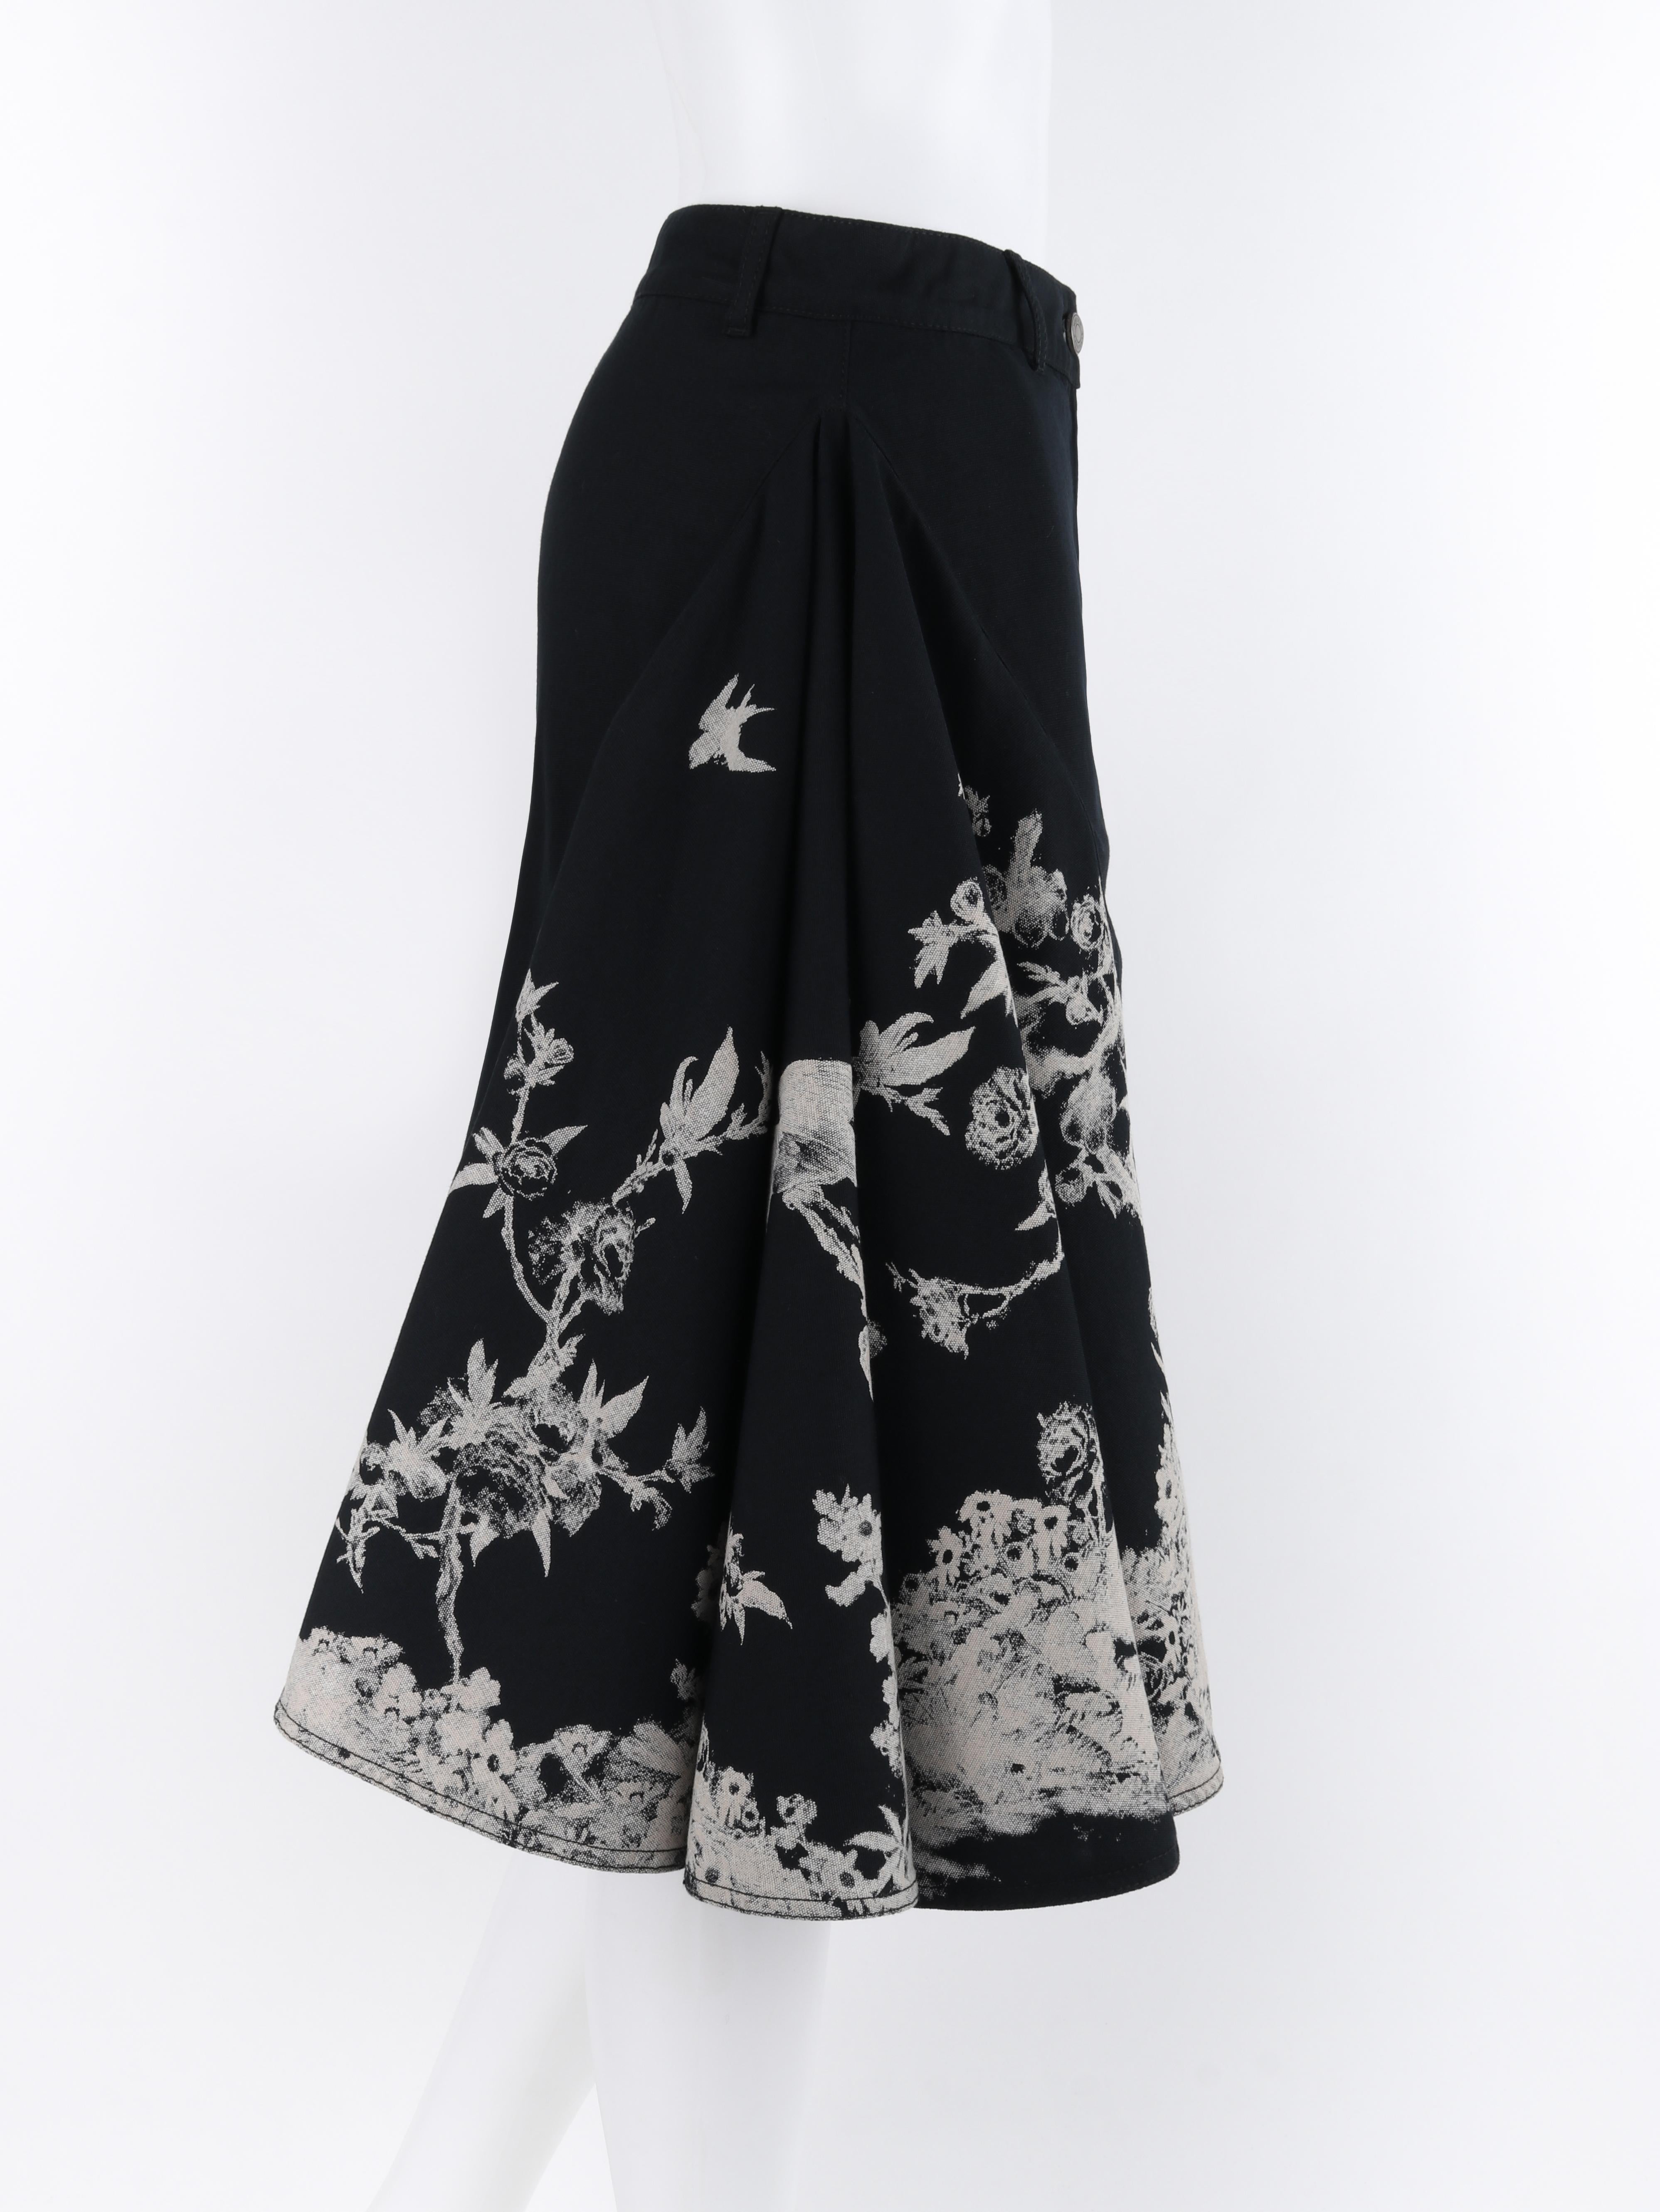 ALEXANDER McQUEEN A/W 2008 Black White Floral Peplum Illusion Circle Skirt In Good Condition For Sale In Thiensville, WI